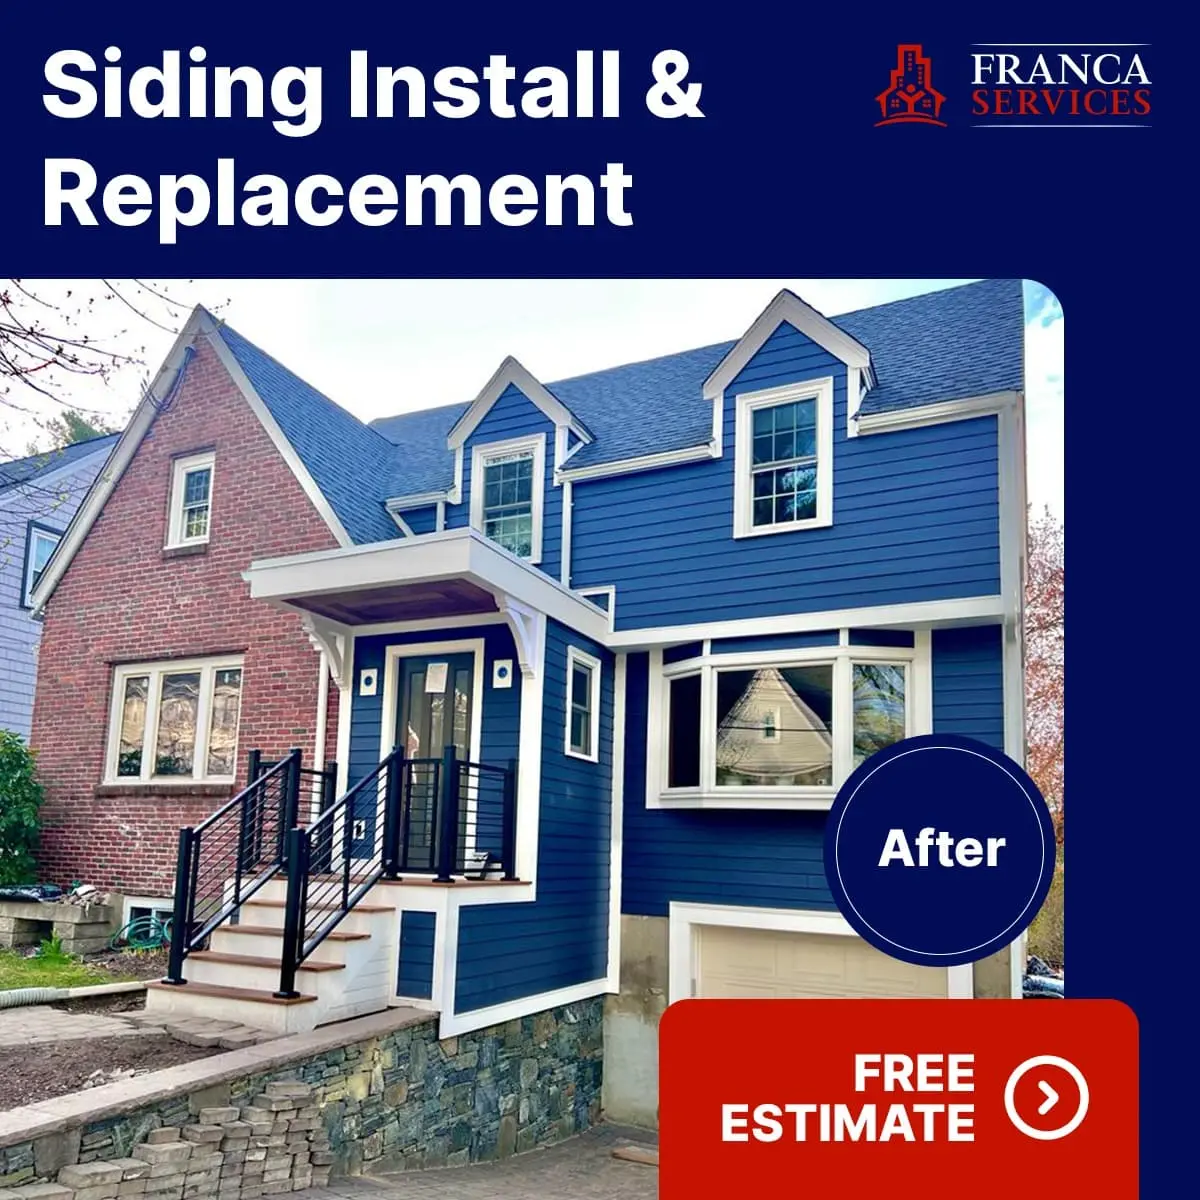 siding replacement service after in Somerville